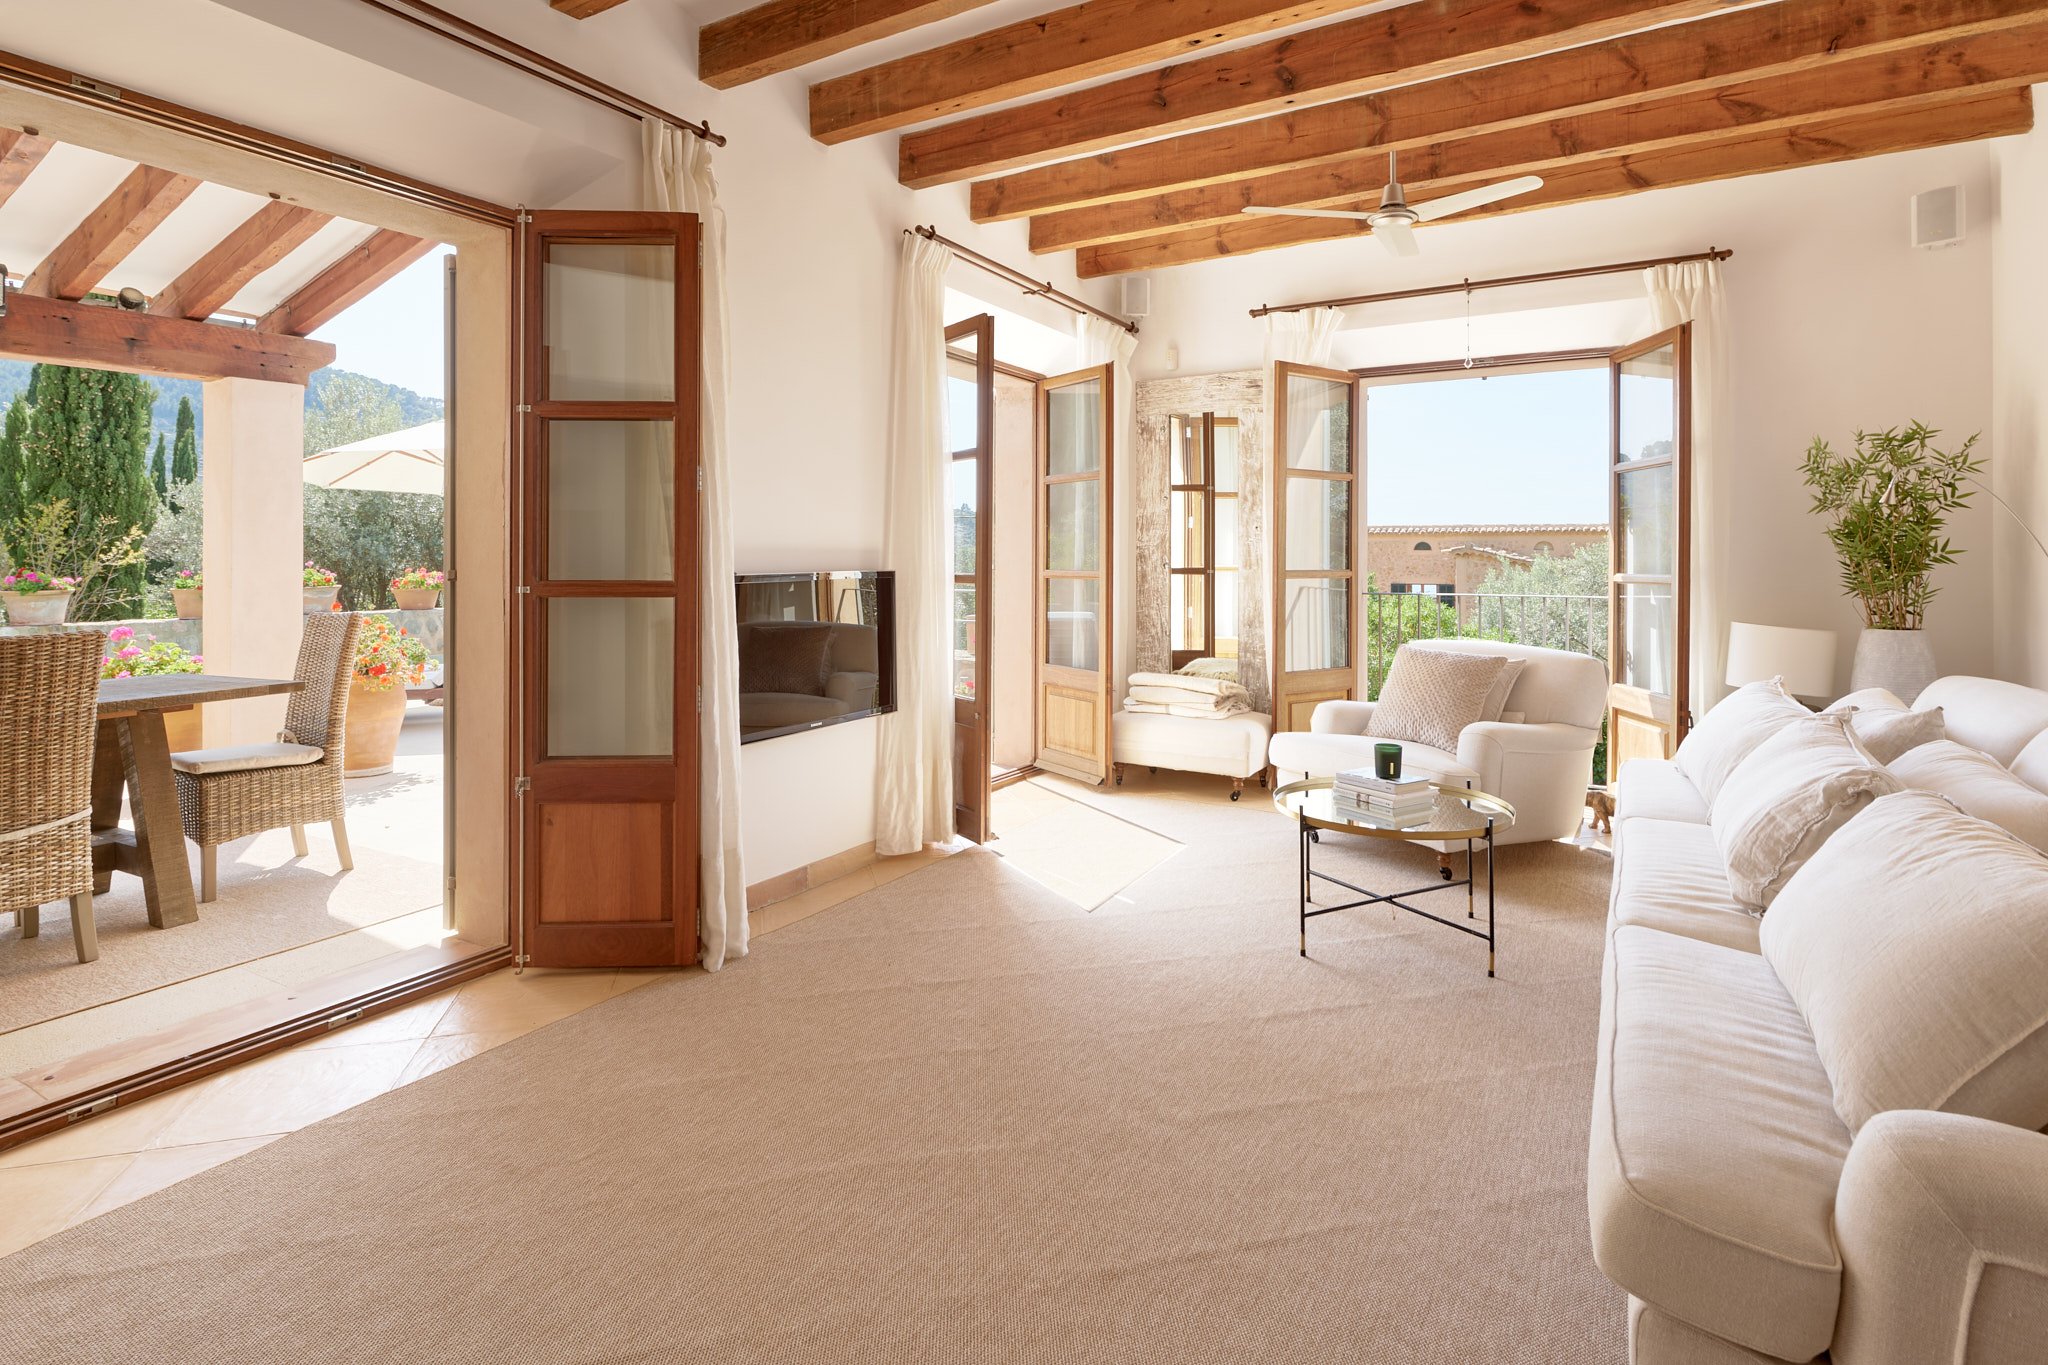 Francis York Casa Charlotte Dream Monthly Holiday Rental in Deia, Mallorca Available in September 15.jpg